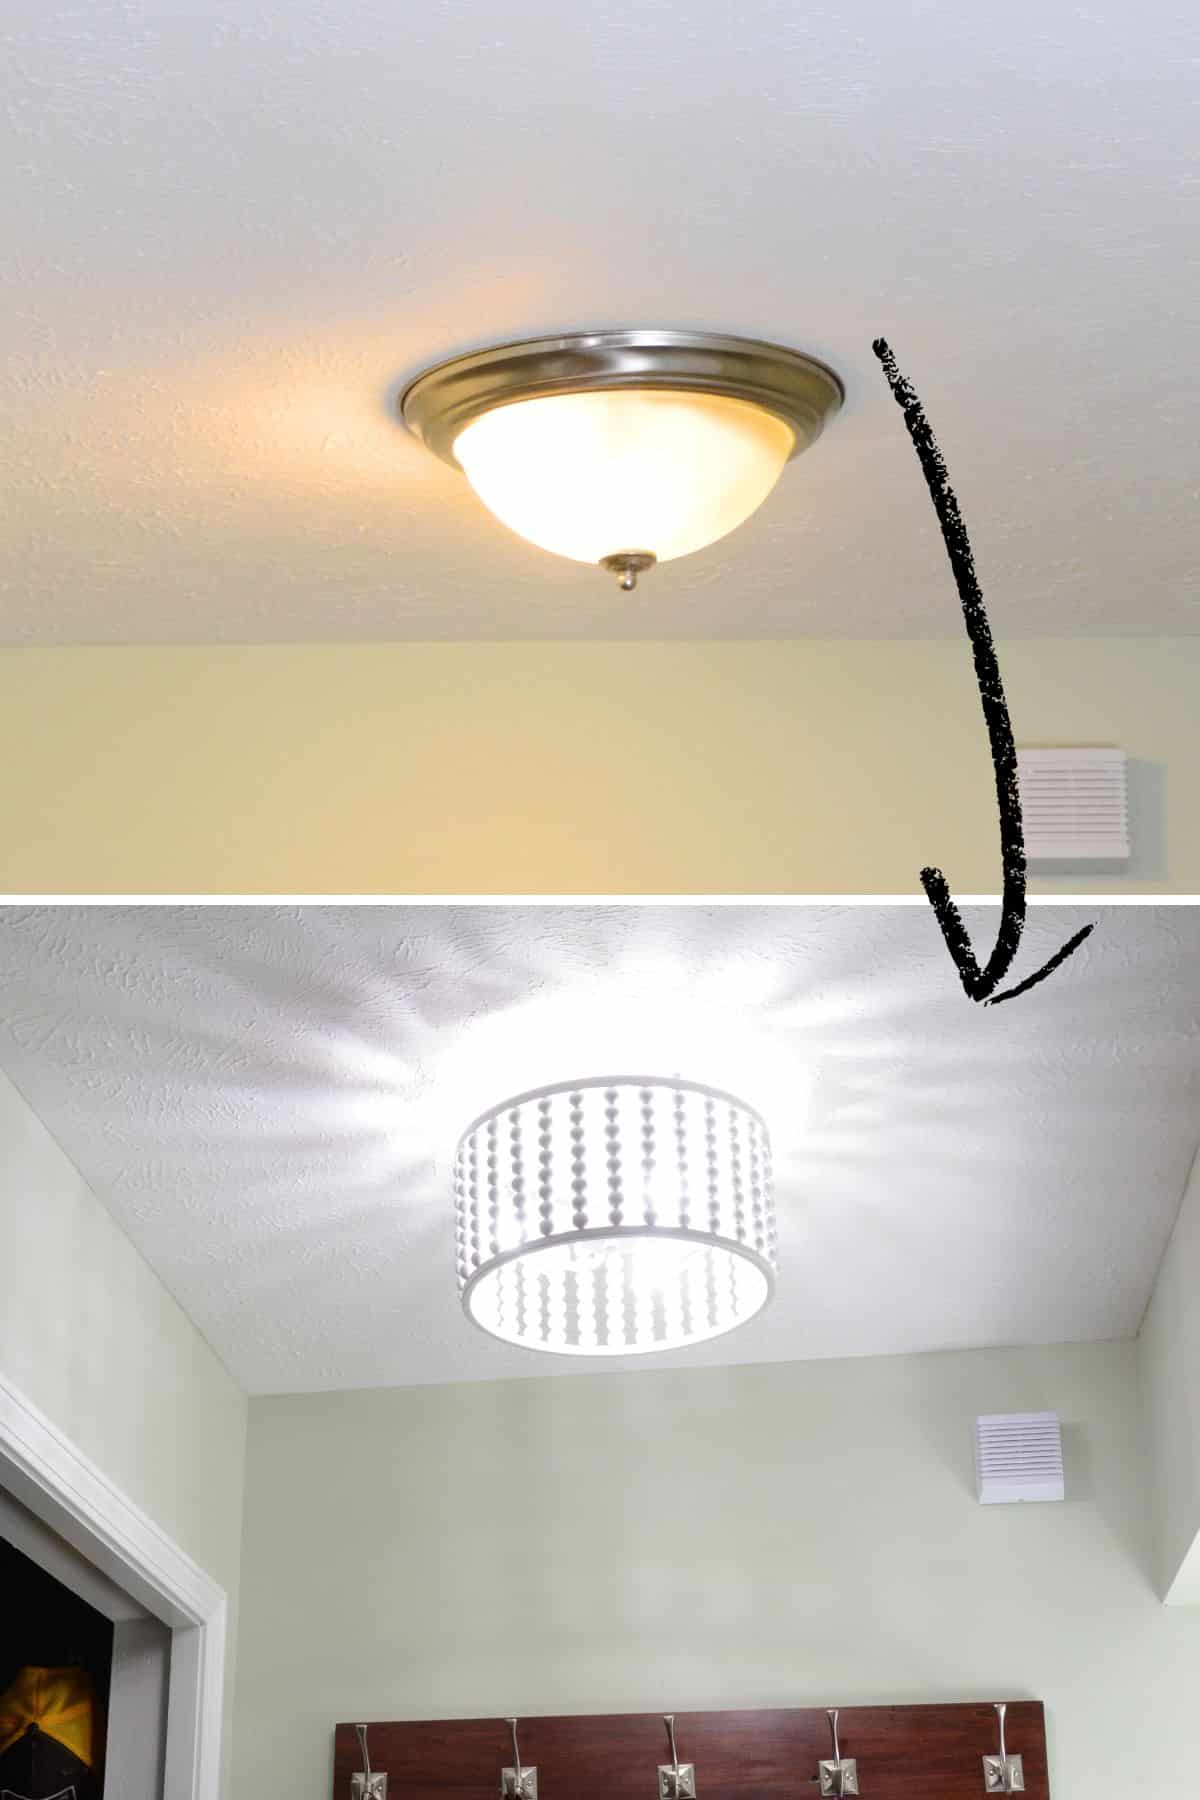 two images of same ceiling but with different flush light fixtures.